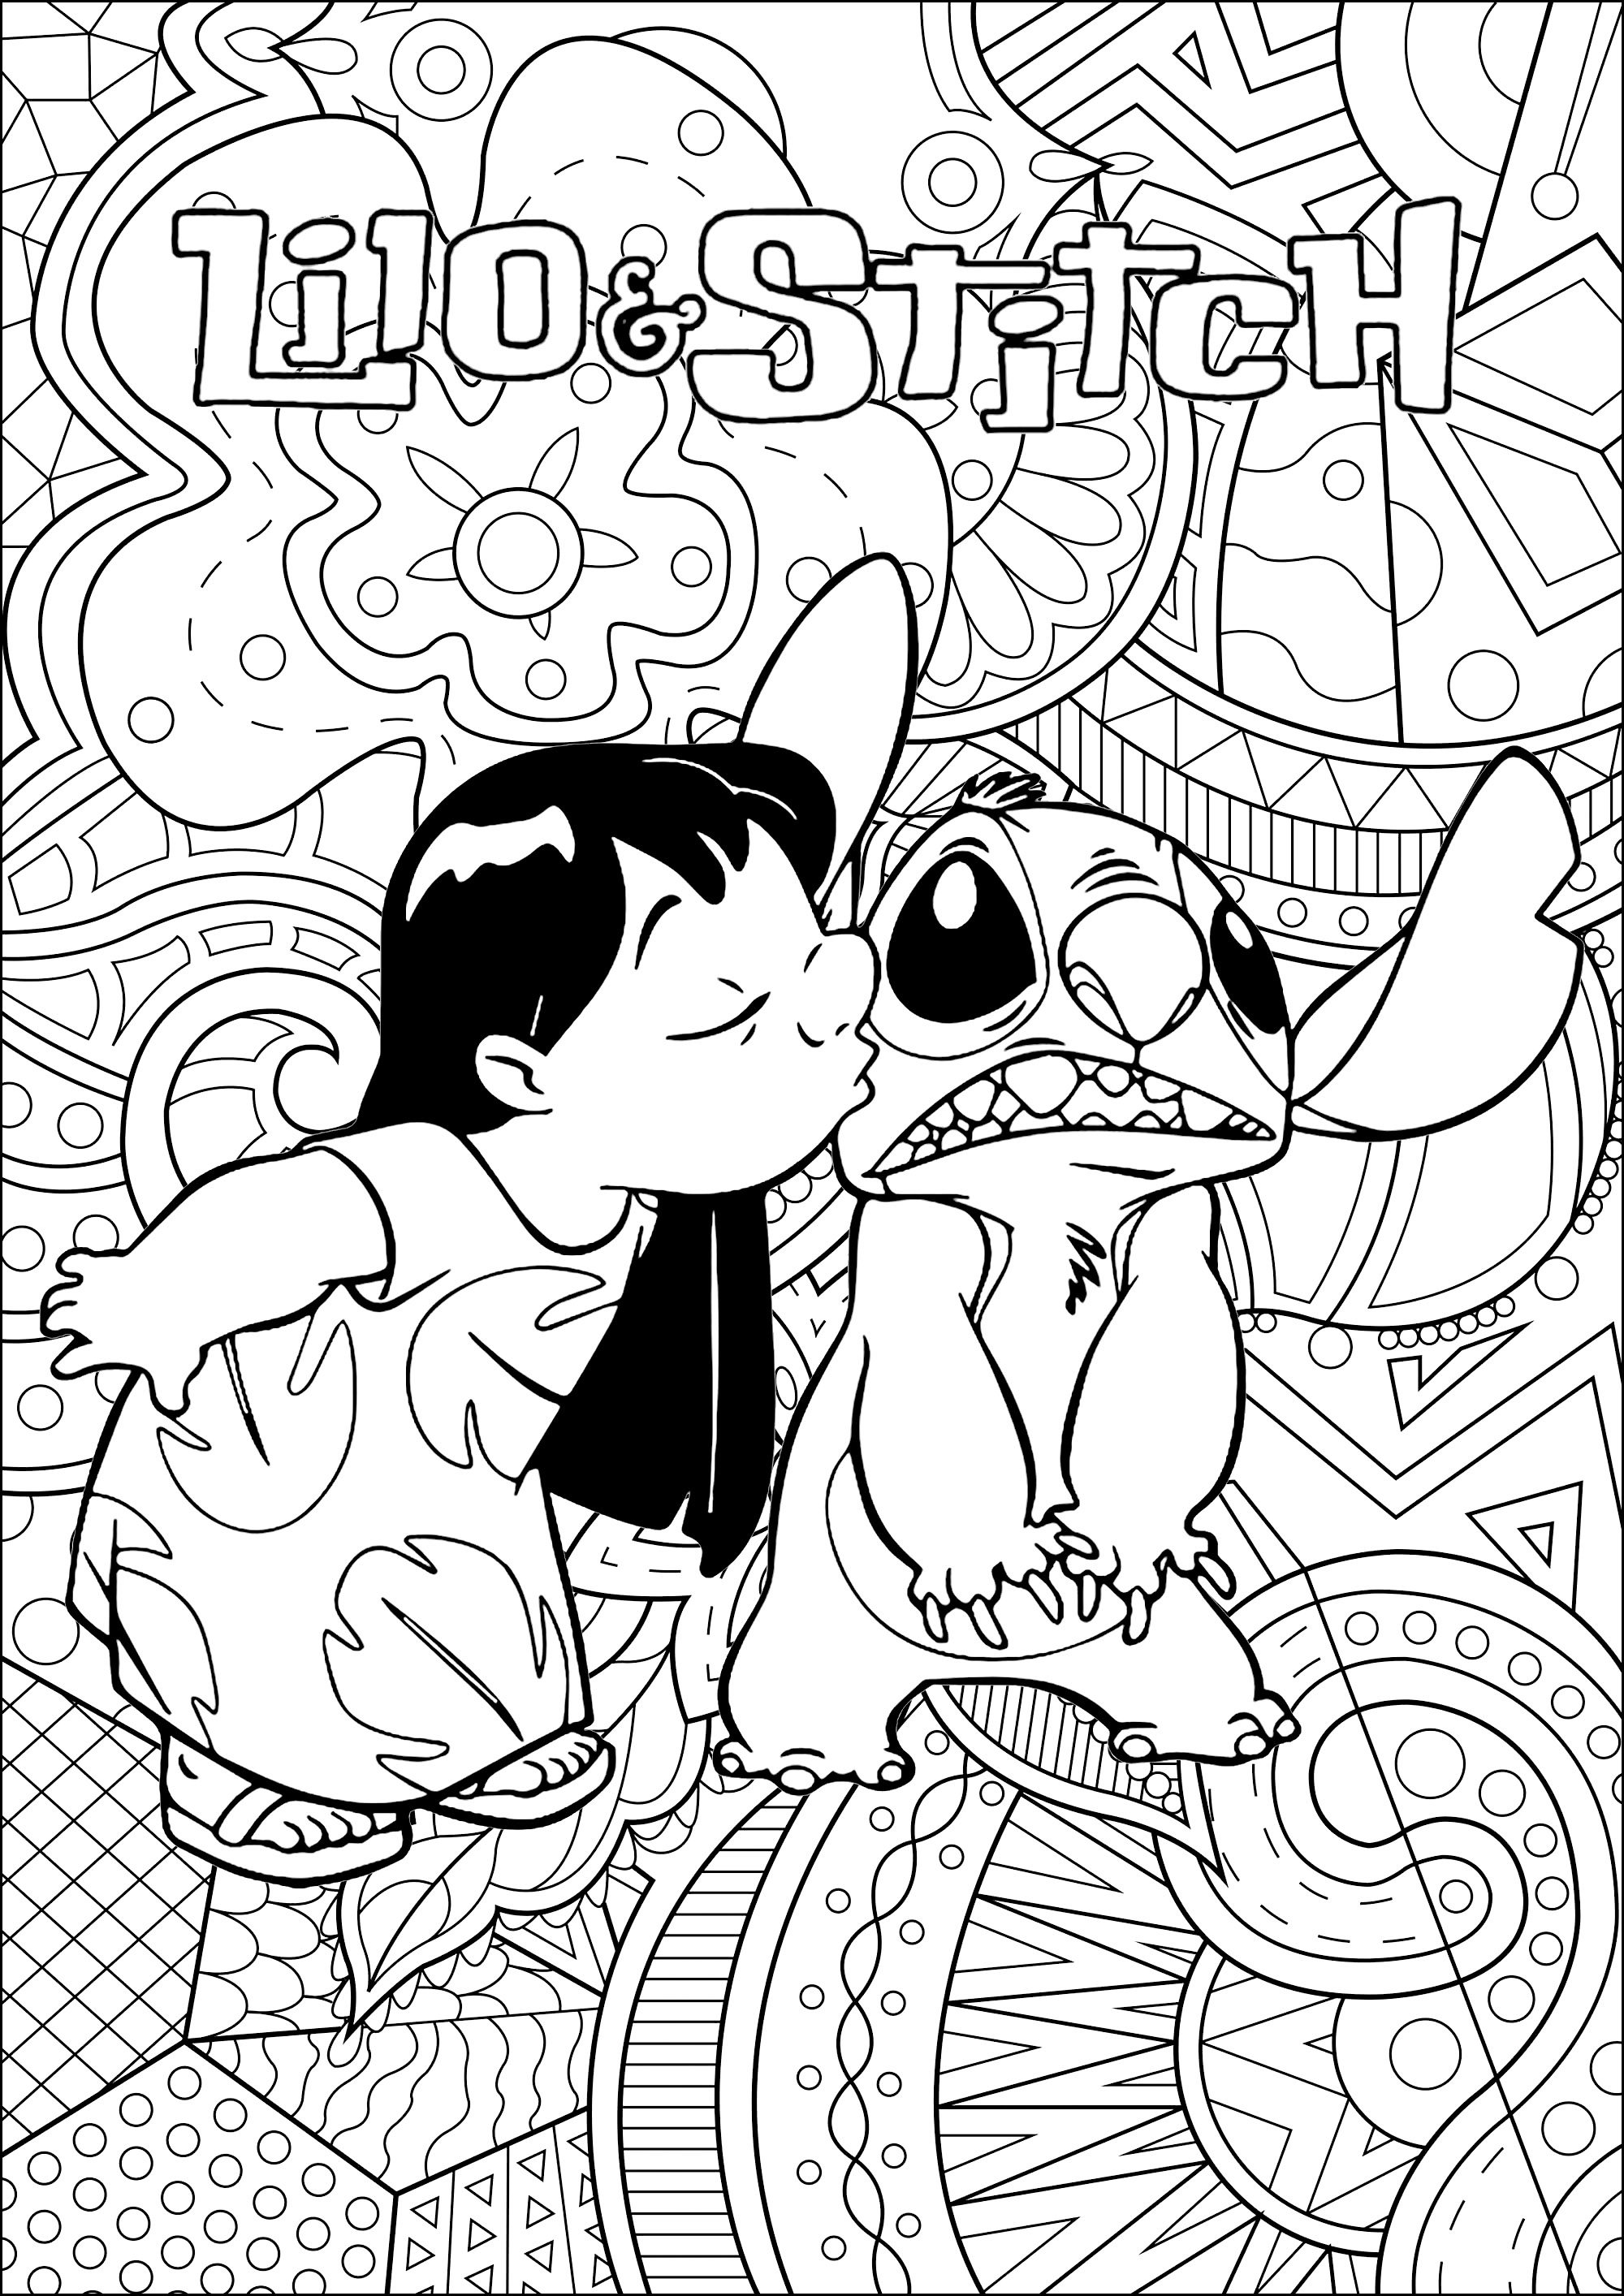 Lilo and stitch disney coloring pages with complex background